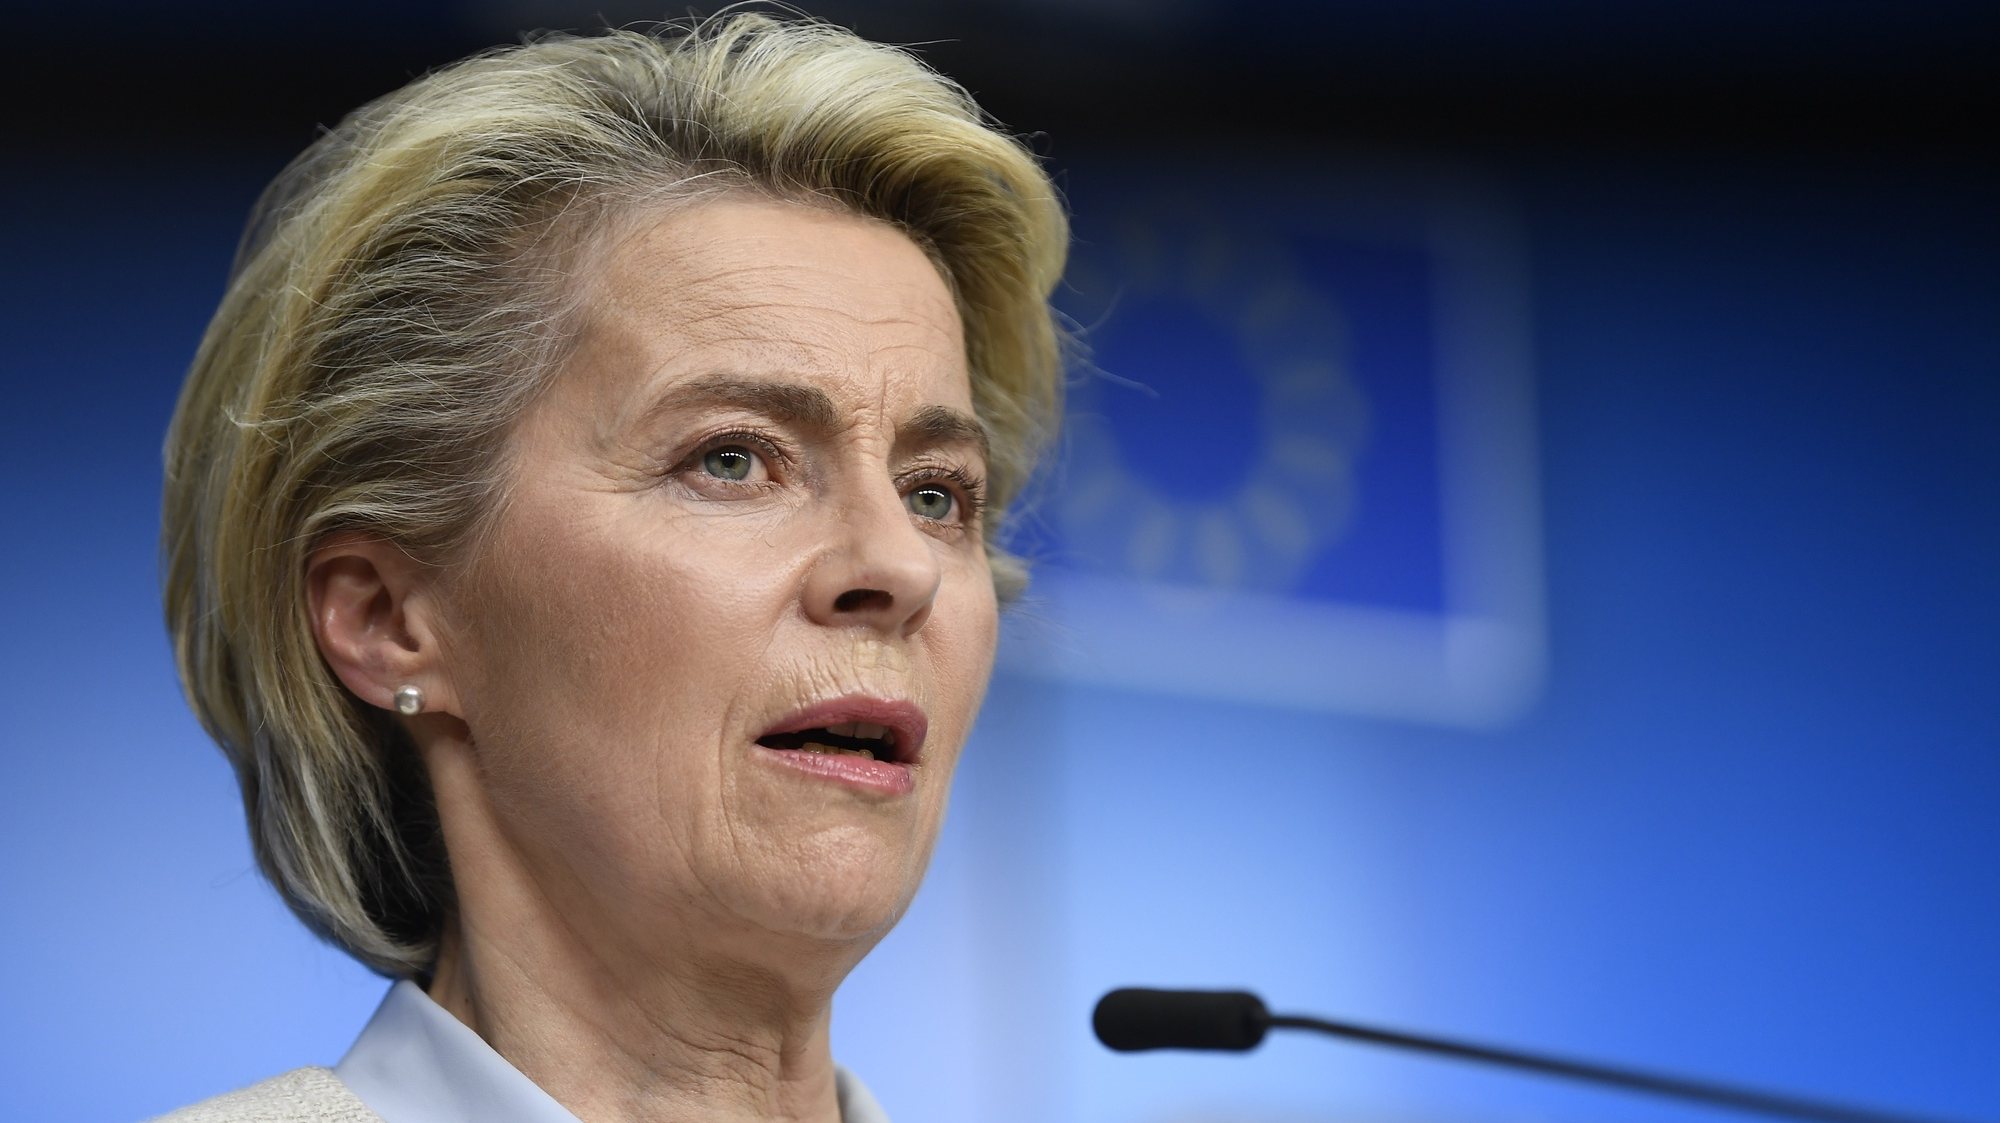 epa09225954 President of the European Commission Ursula von der Leyen speaks during a press conference at the EU summit at the European Council building in Brussels, Belgium, 24 May 2021. European Union leaders will take part in a two day in-person meeting to discuss the coronavirus pandemic, climate change and Russia.  EPA/JOHN THYS / POOL